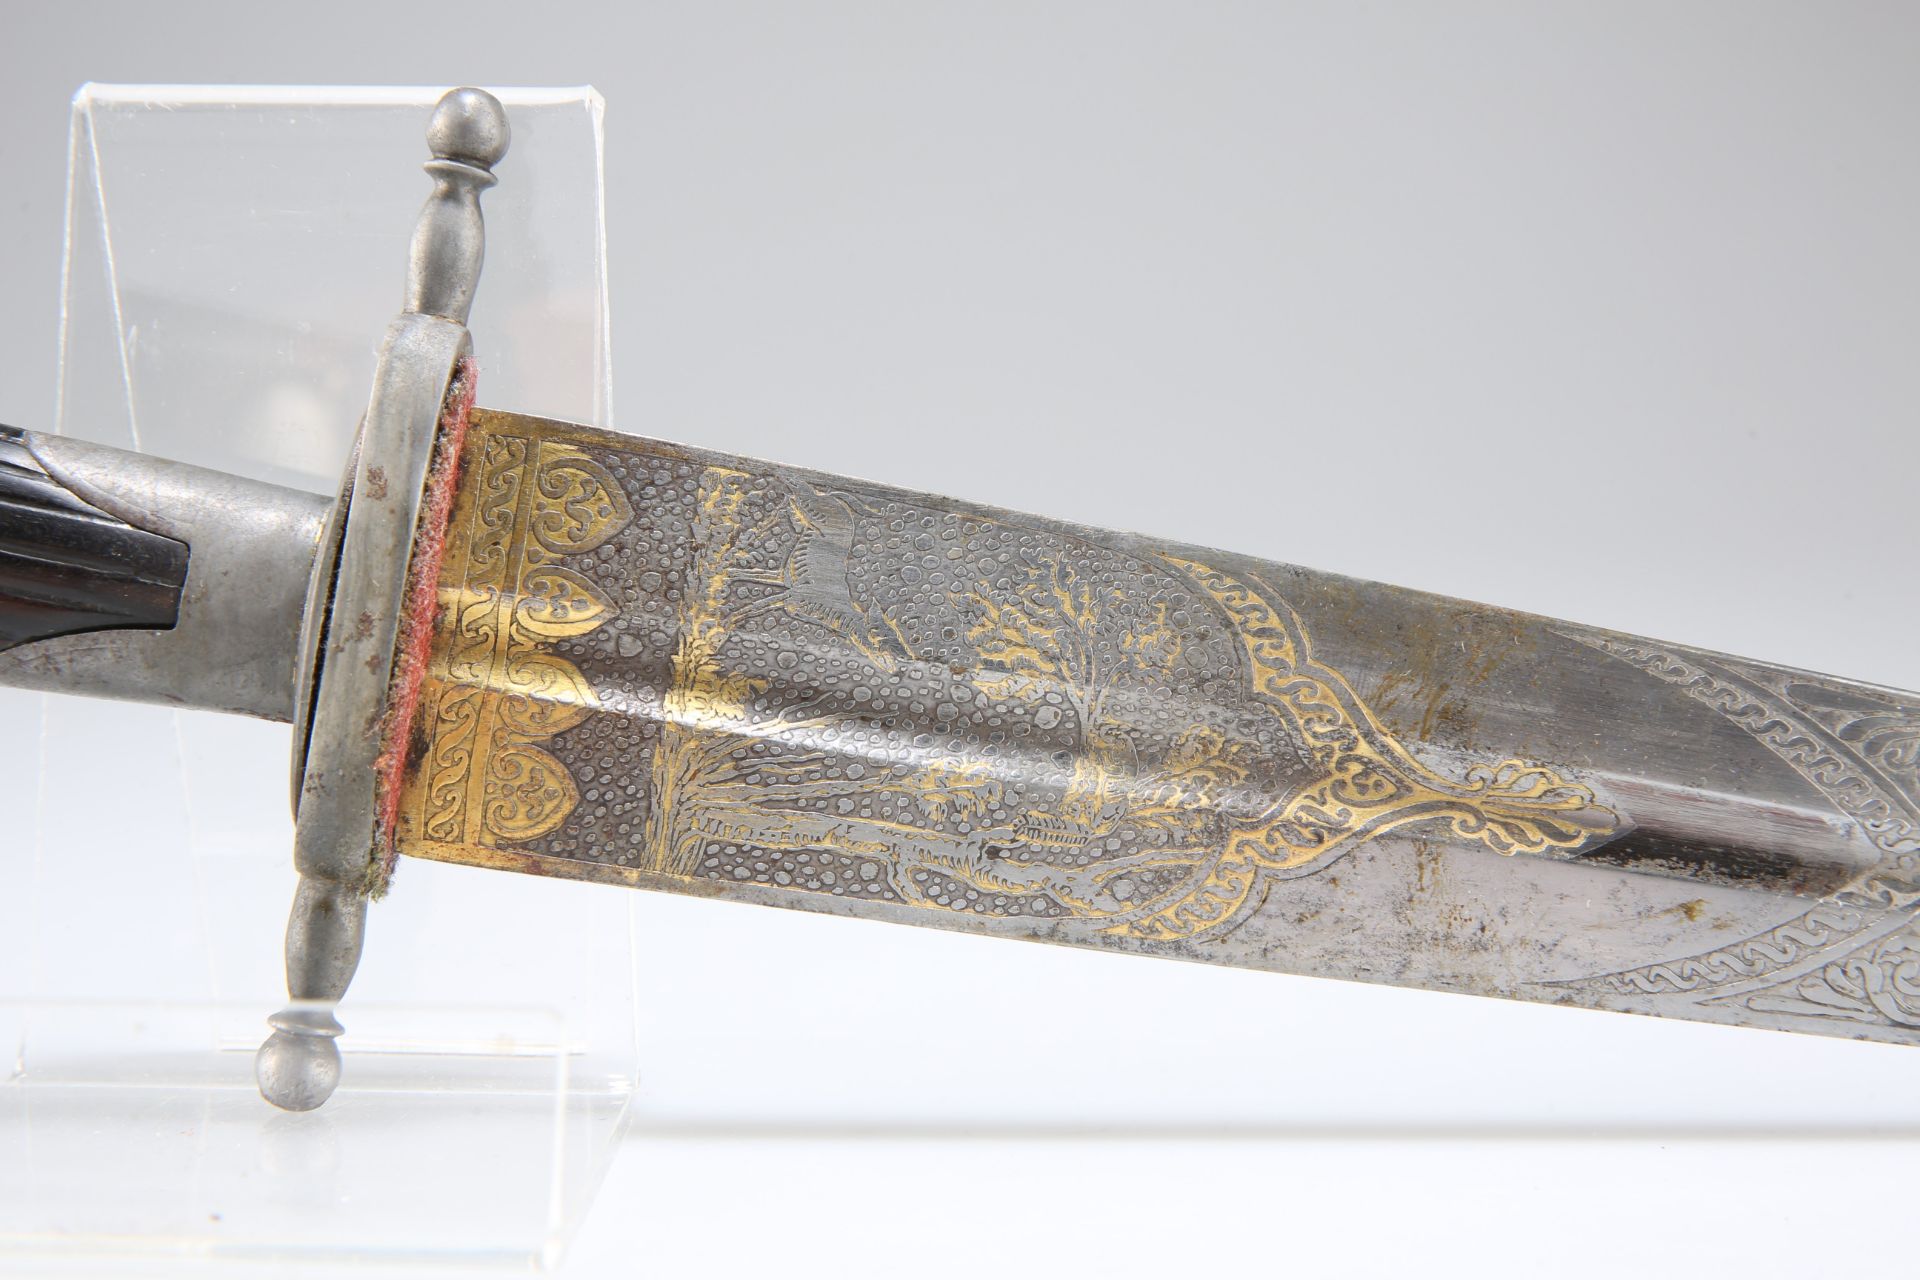 A LATE 19TH CENTURY RUSSIAN HUNTING DAGGER - Image 5 of 6